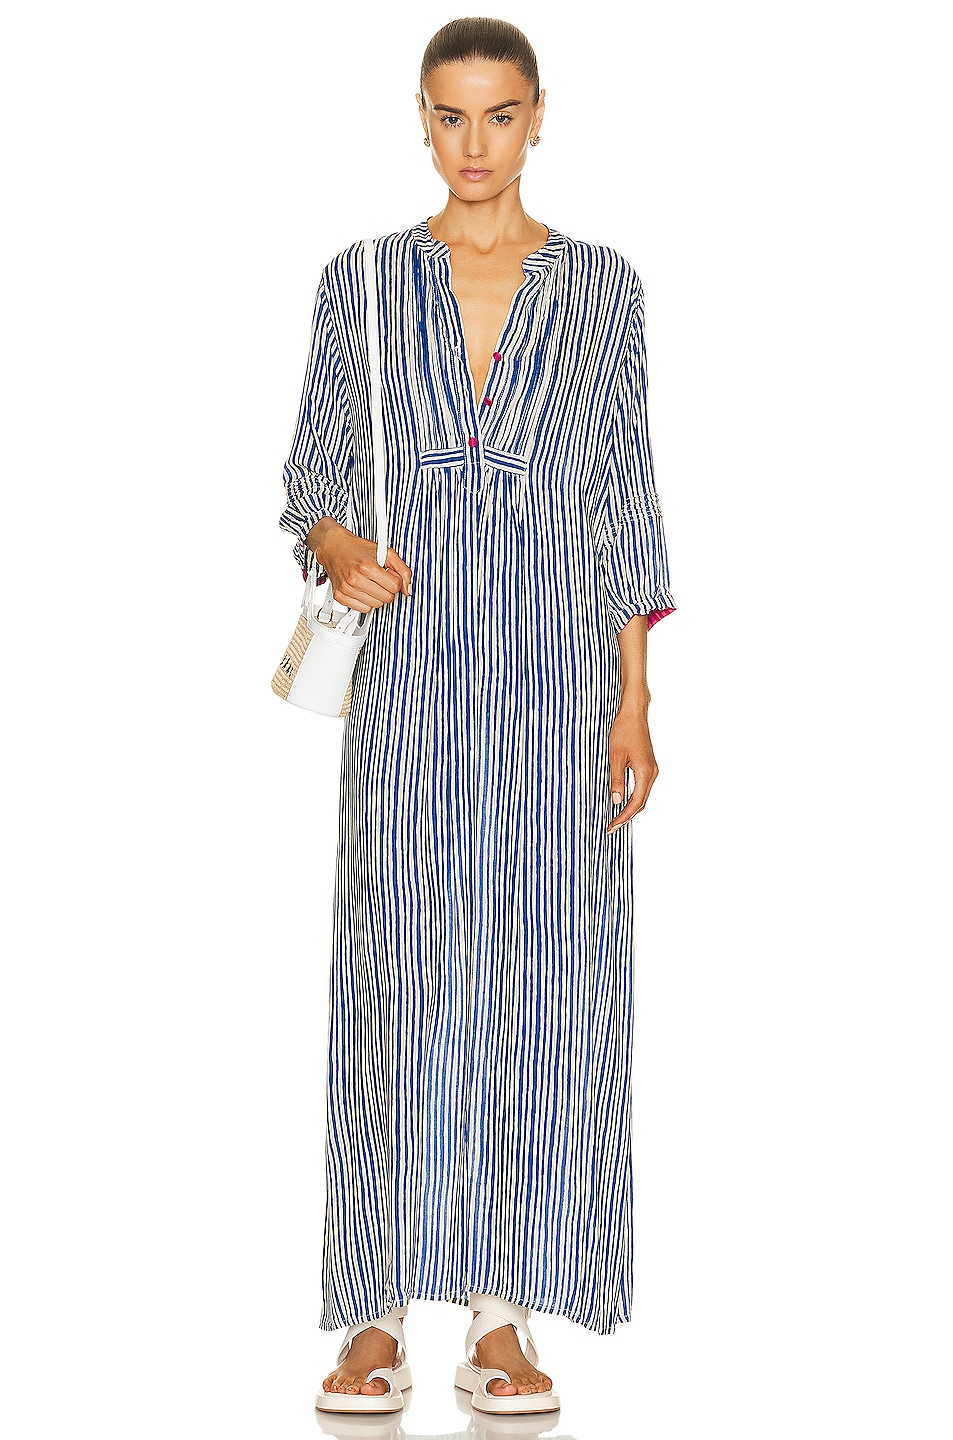 Image 1 of Natalie Martin Sammie Maxi Dress in Painted Stripe Deep Blue